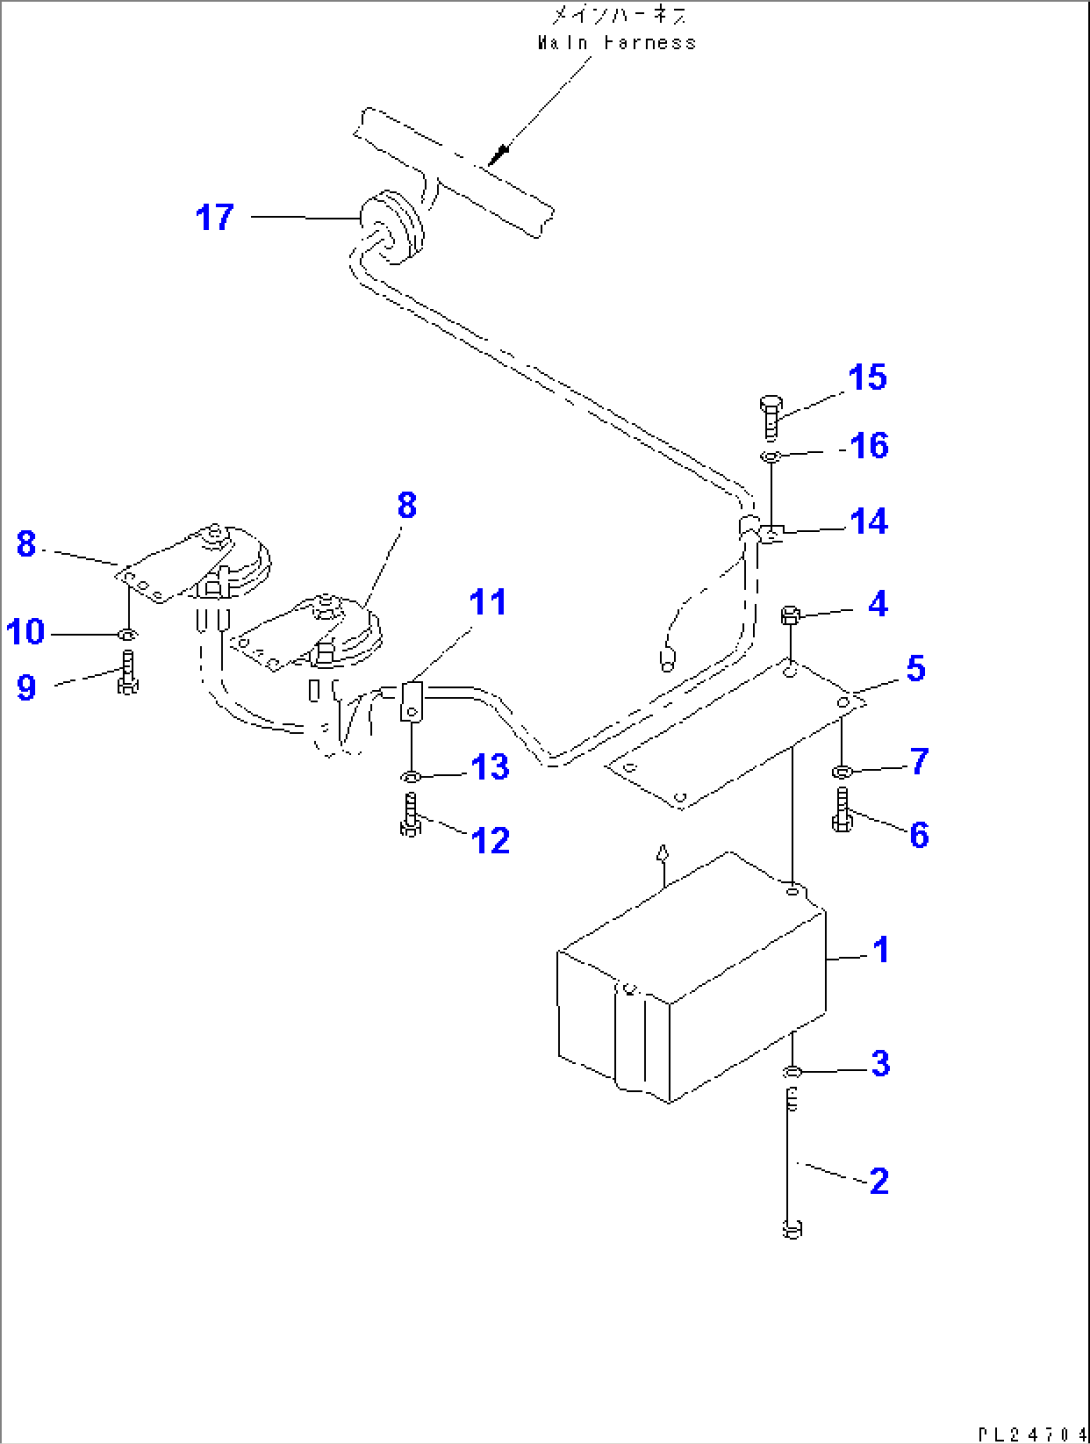 ELECTRICAL SYSTEM (8/9) (HORN)